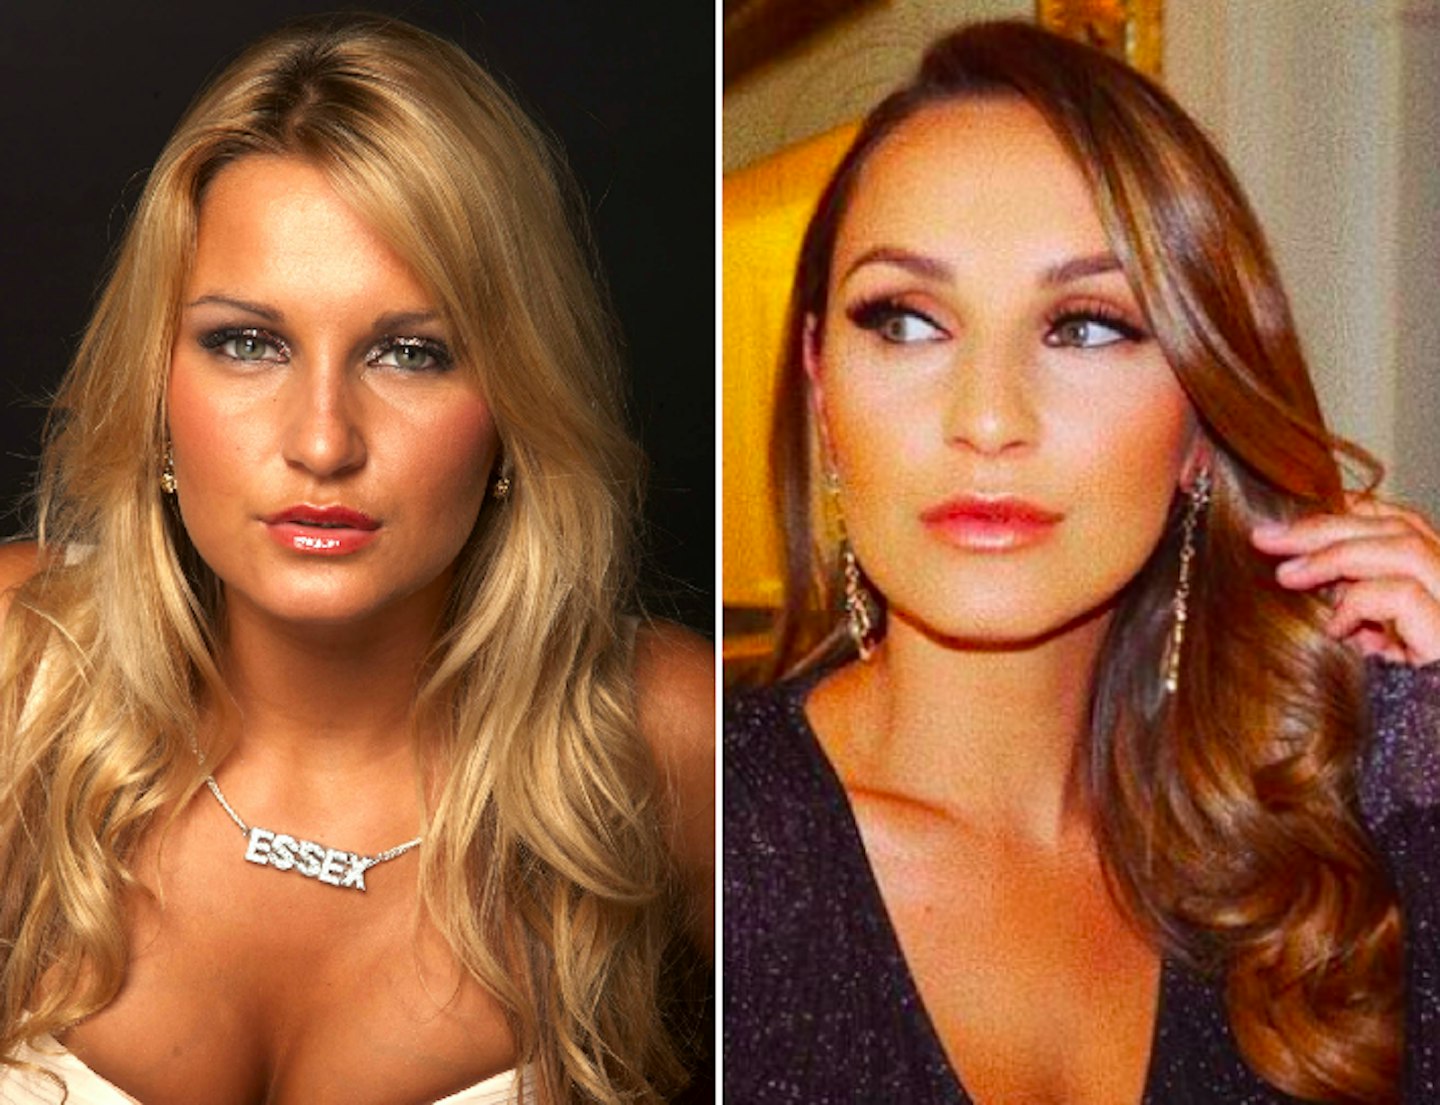 28 celebrities who look VERY different after plastic surgery